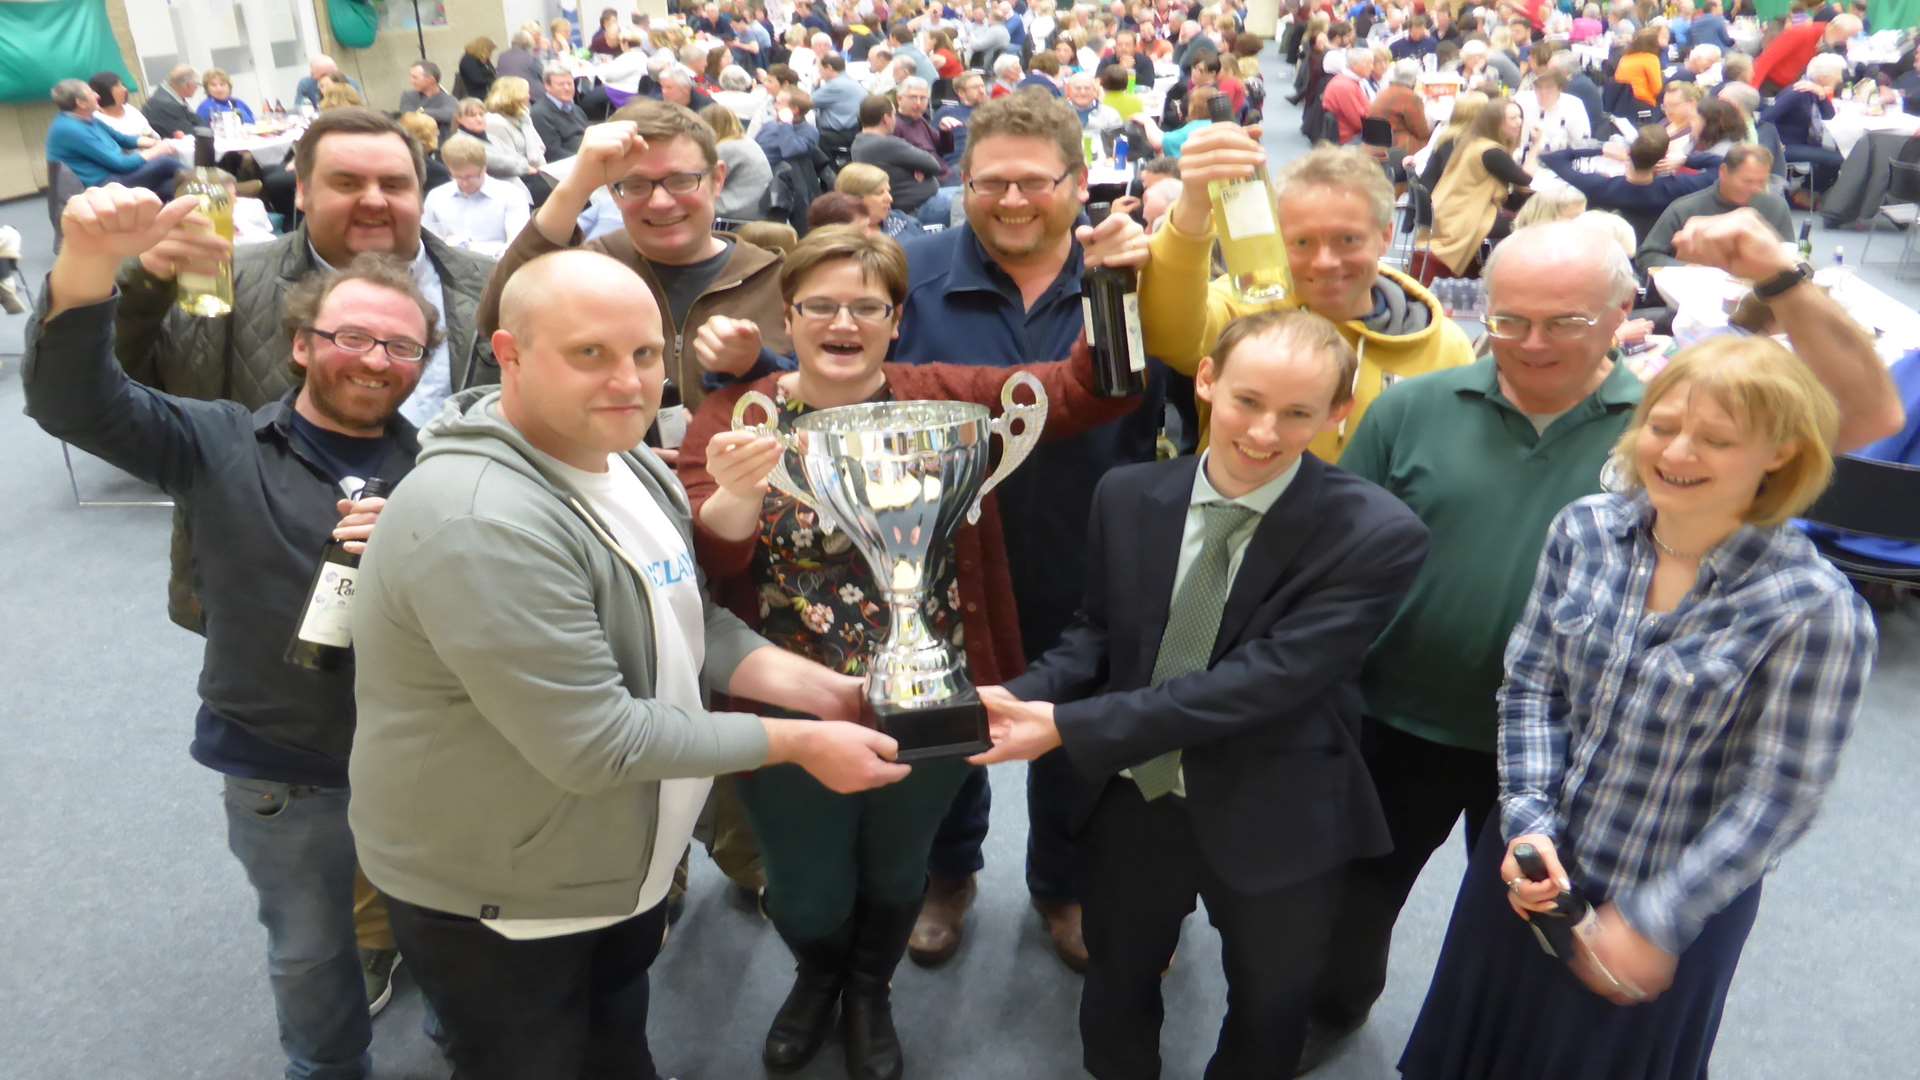 Big Charity Quiz winners The Unicorn Inn celebrate victory with key partners at the Canterbury heat of the KM Big Charity Quiz staged at the University of Kent sports hall on Friday, April 22.